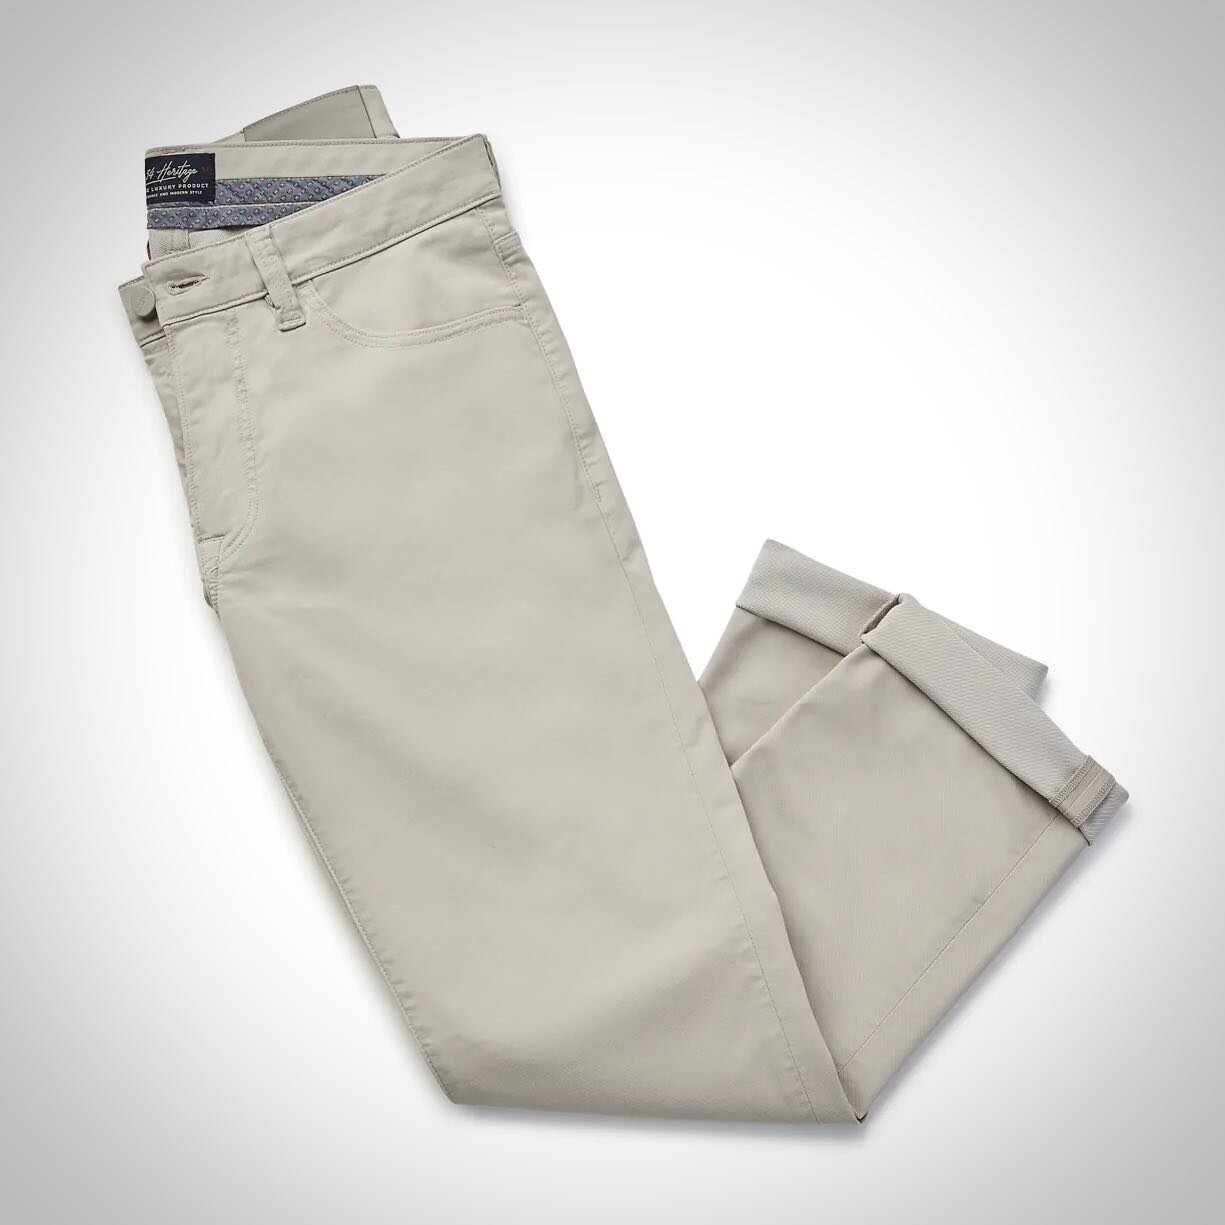 CoolMax by @34heritage 

Light in every sense of the word, these sophisticated pants have a light, bright wash and ultra-lightweight structure for an effortless look and feel that seamlessly dresses up or down.

It&rsquo;s a breeze to stay cool no ma